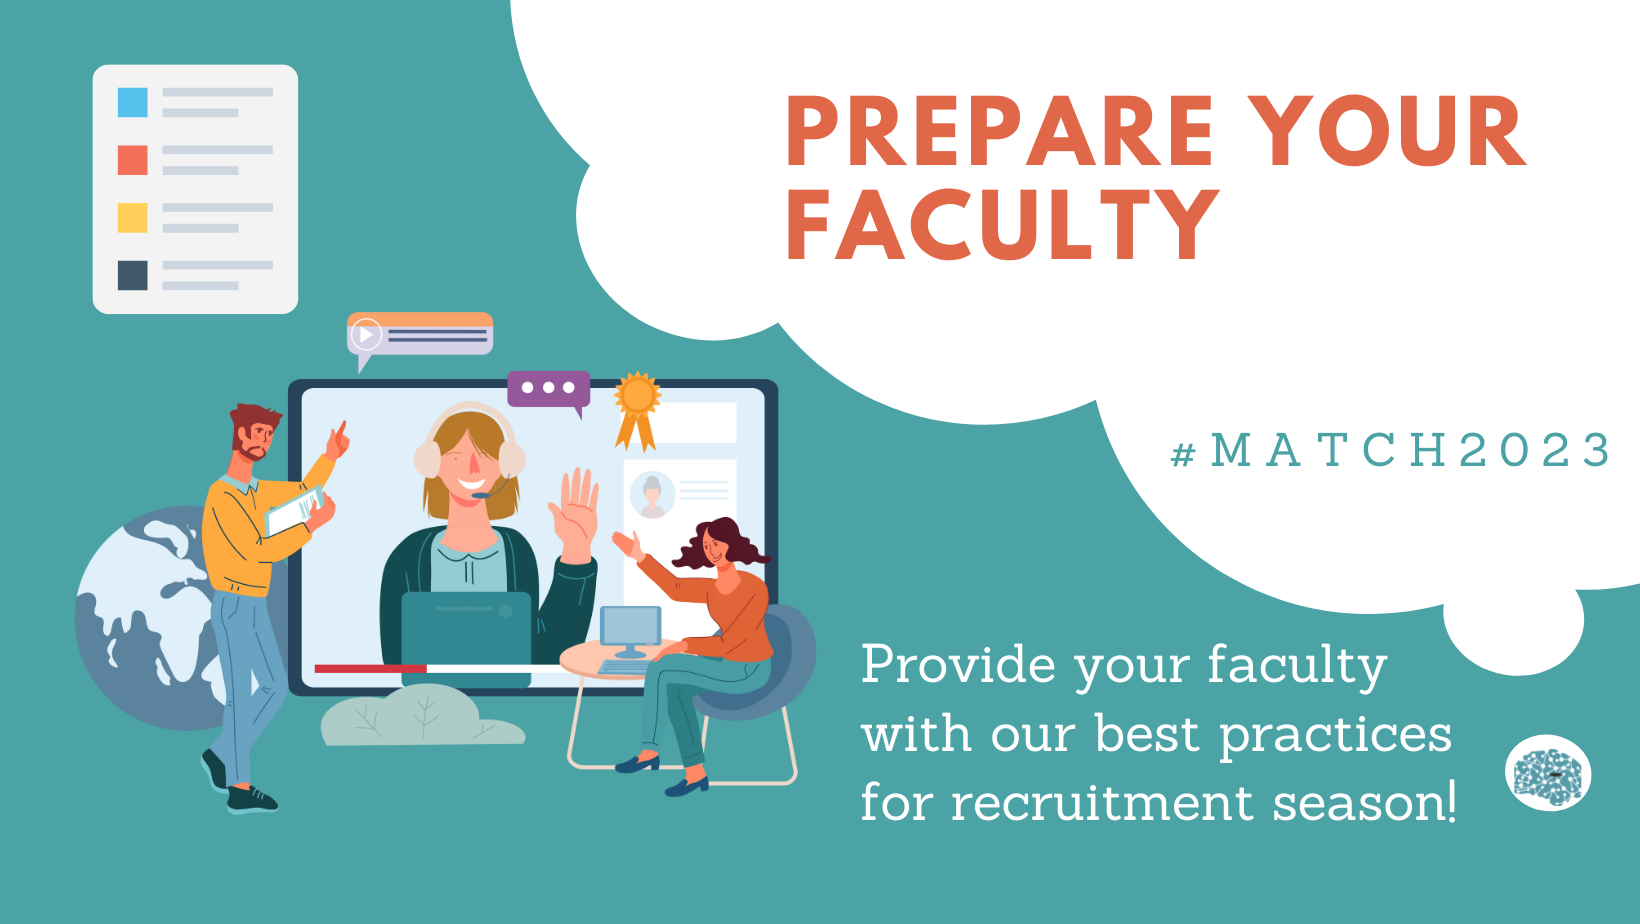 Prepare your faculty - New